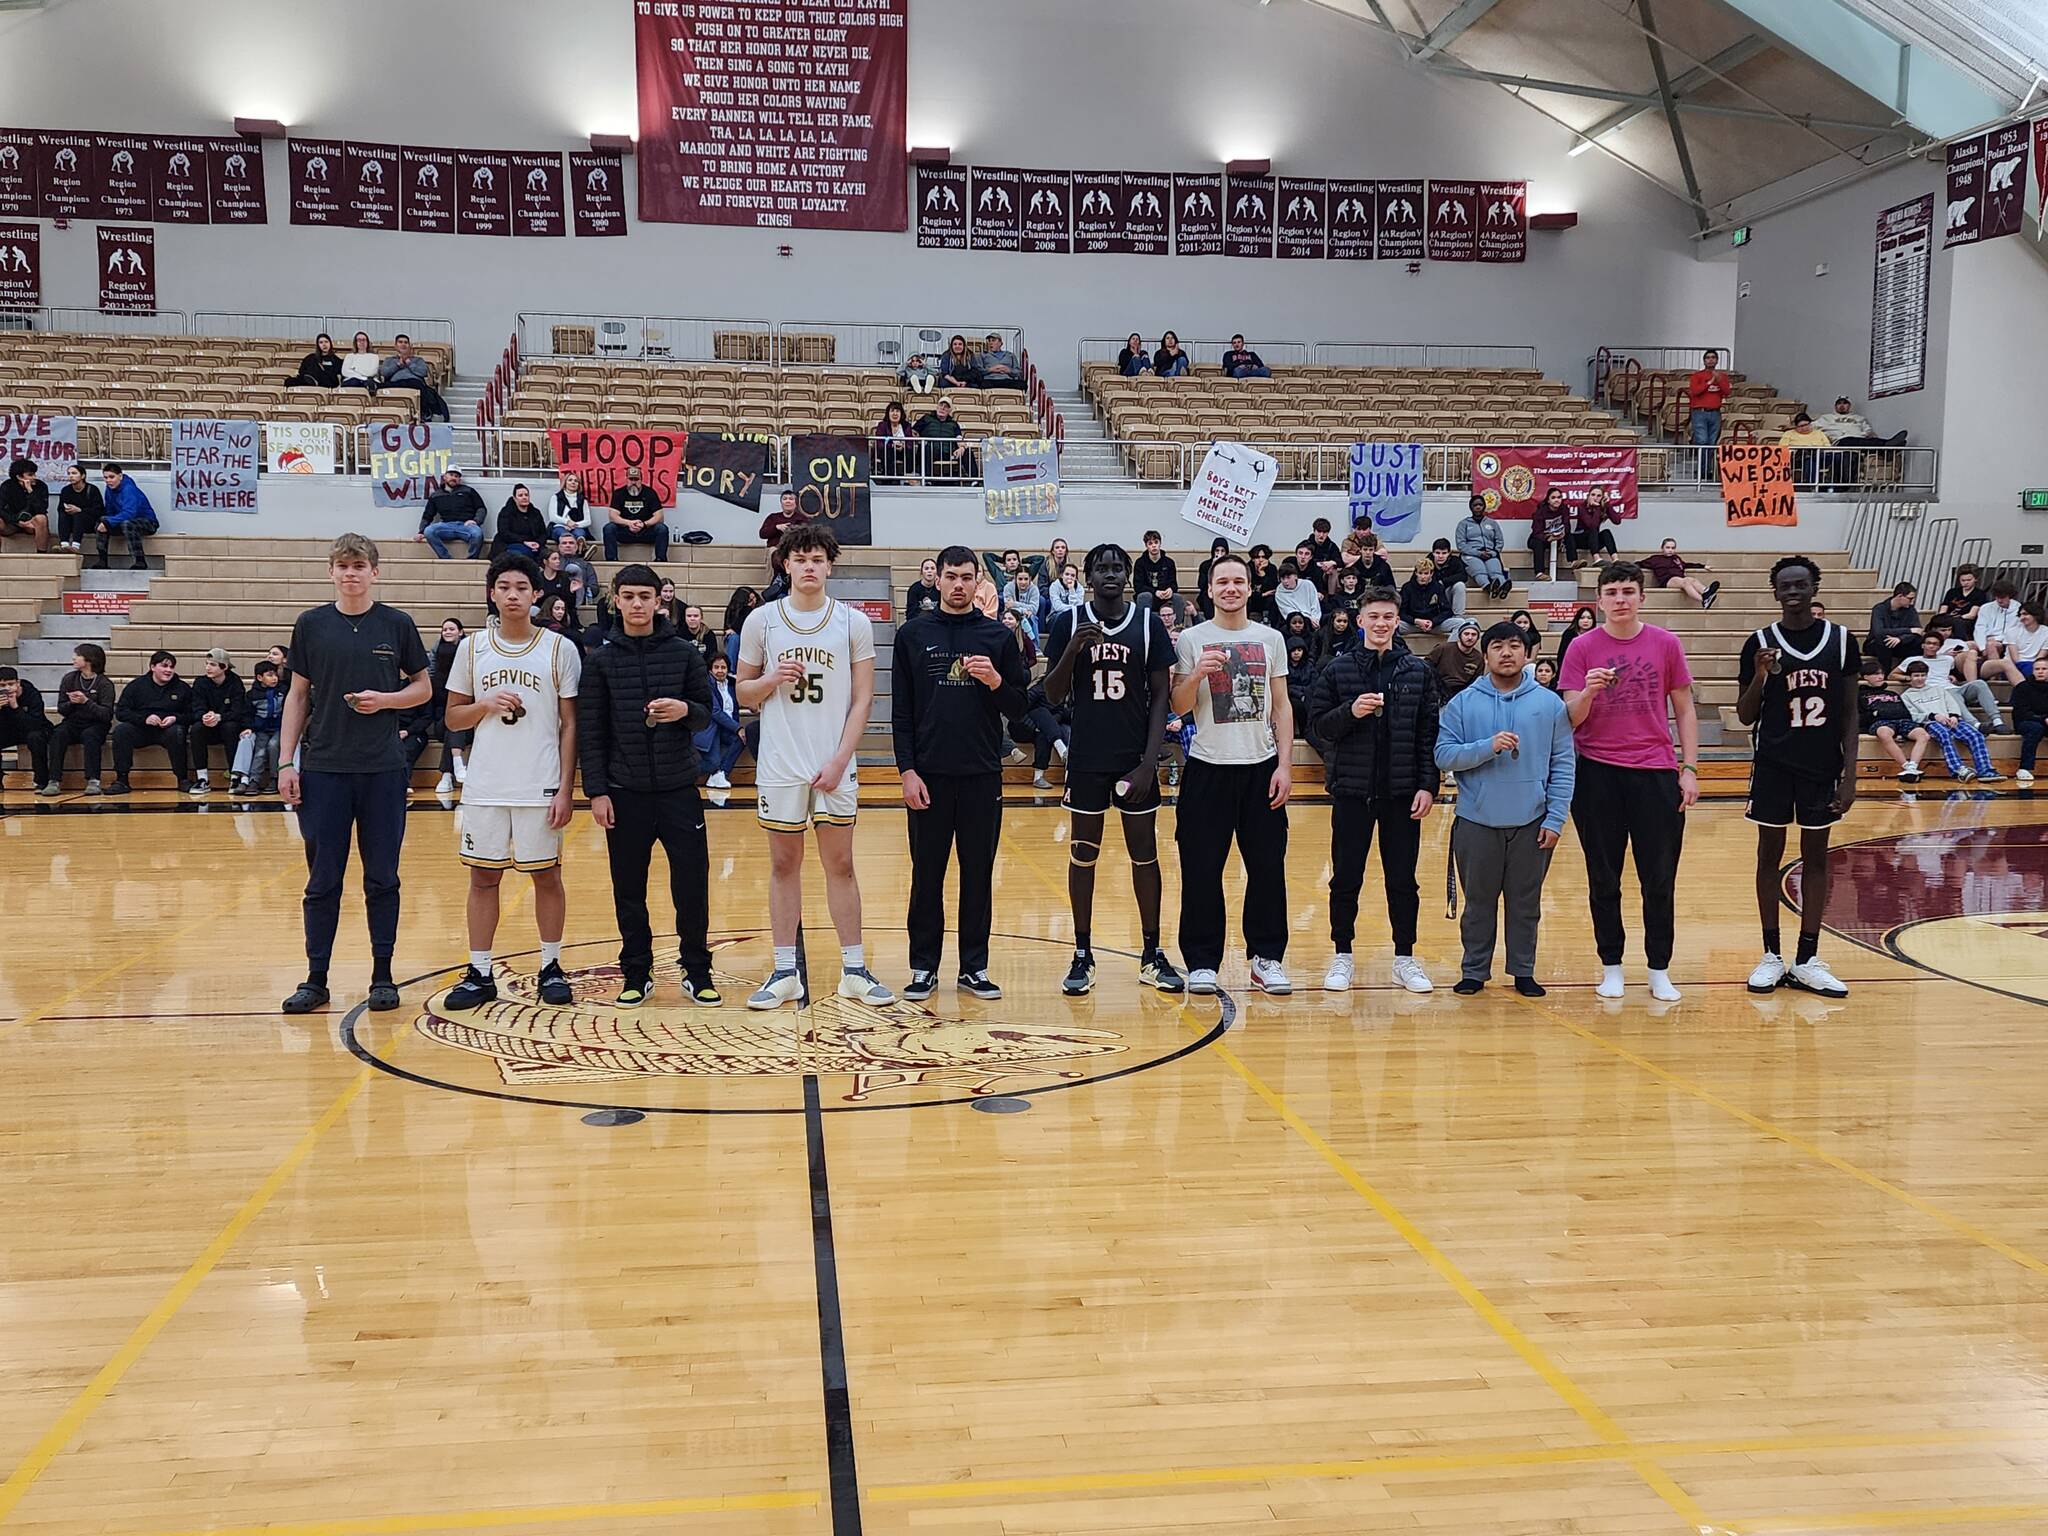 The boys’ all-tournament team at last week’s Clarke Cochrane Christmas Classic in Ketchikan includes Thunder Mountain High School guards Thomas Baxter and Samuel Lockhart. TMHS finished third among the eight boys’ teams in the tournament. (Photo courtesy TMHS basketball)